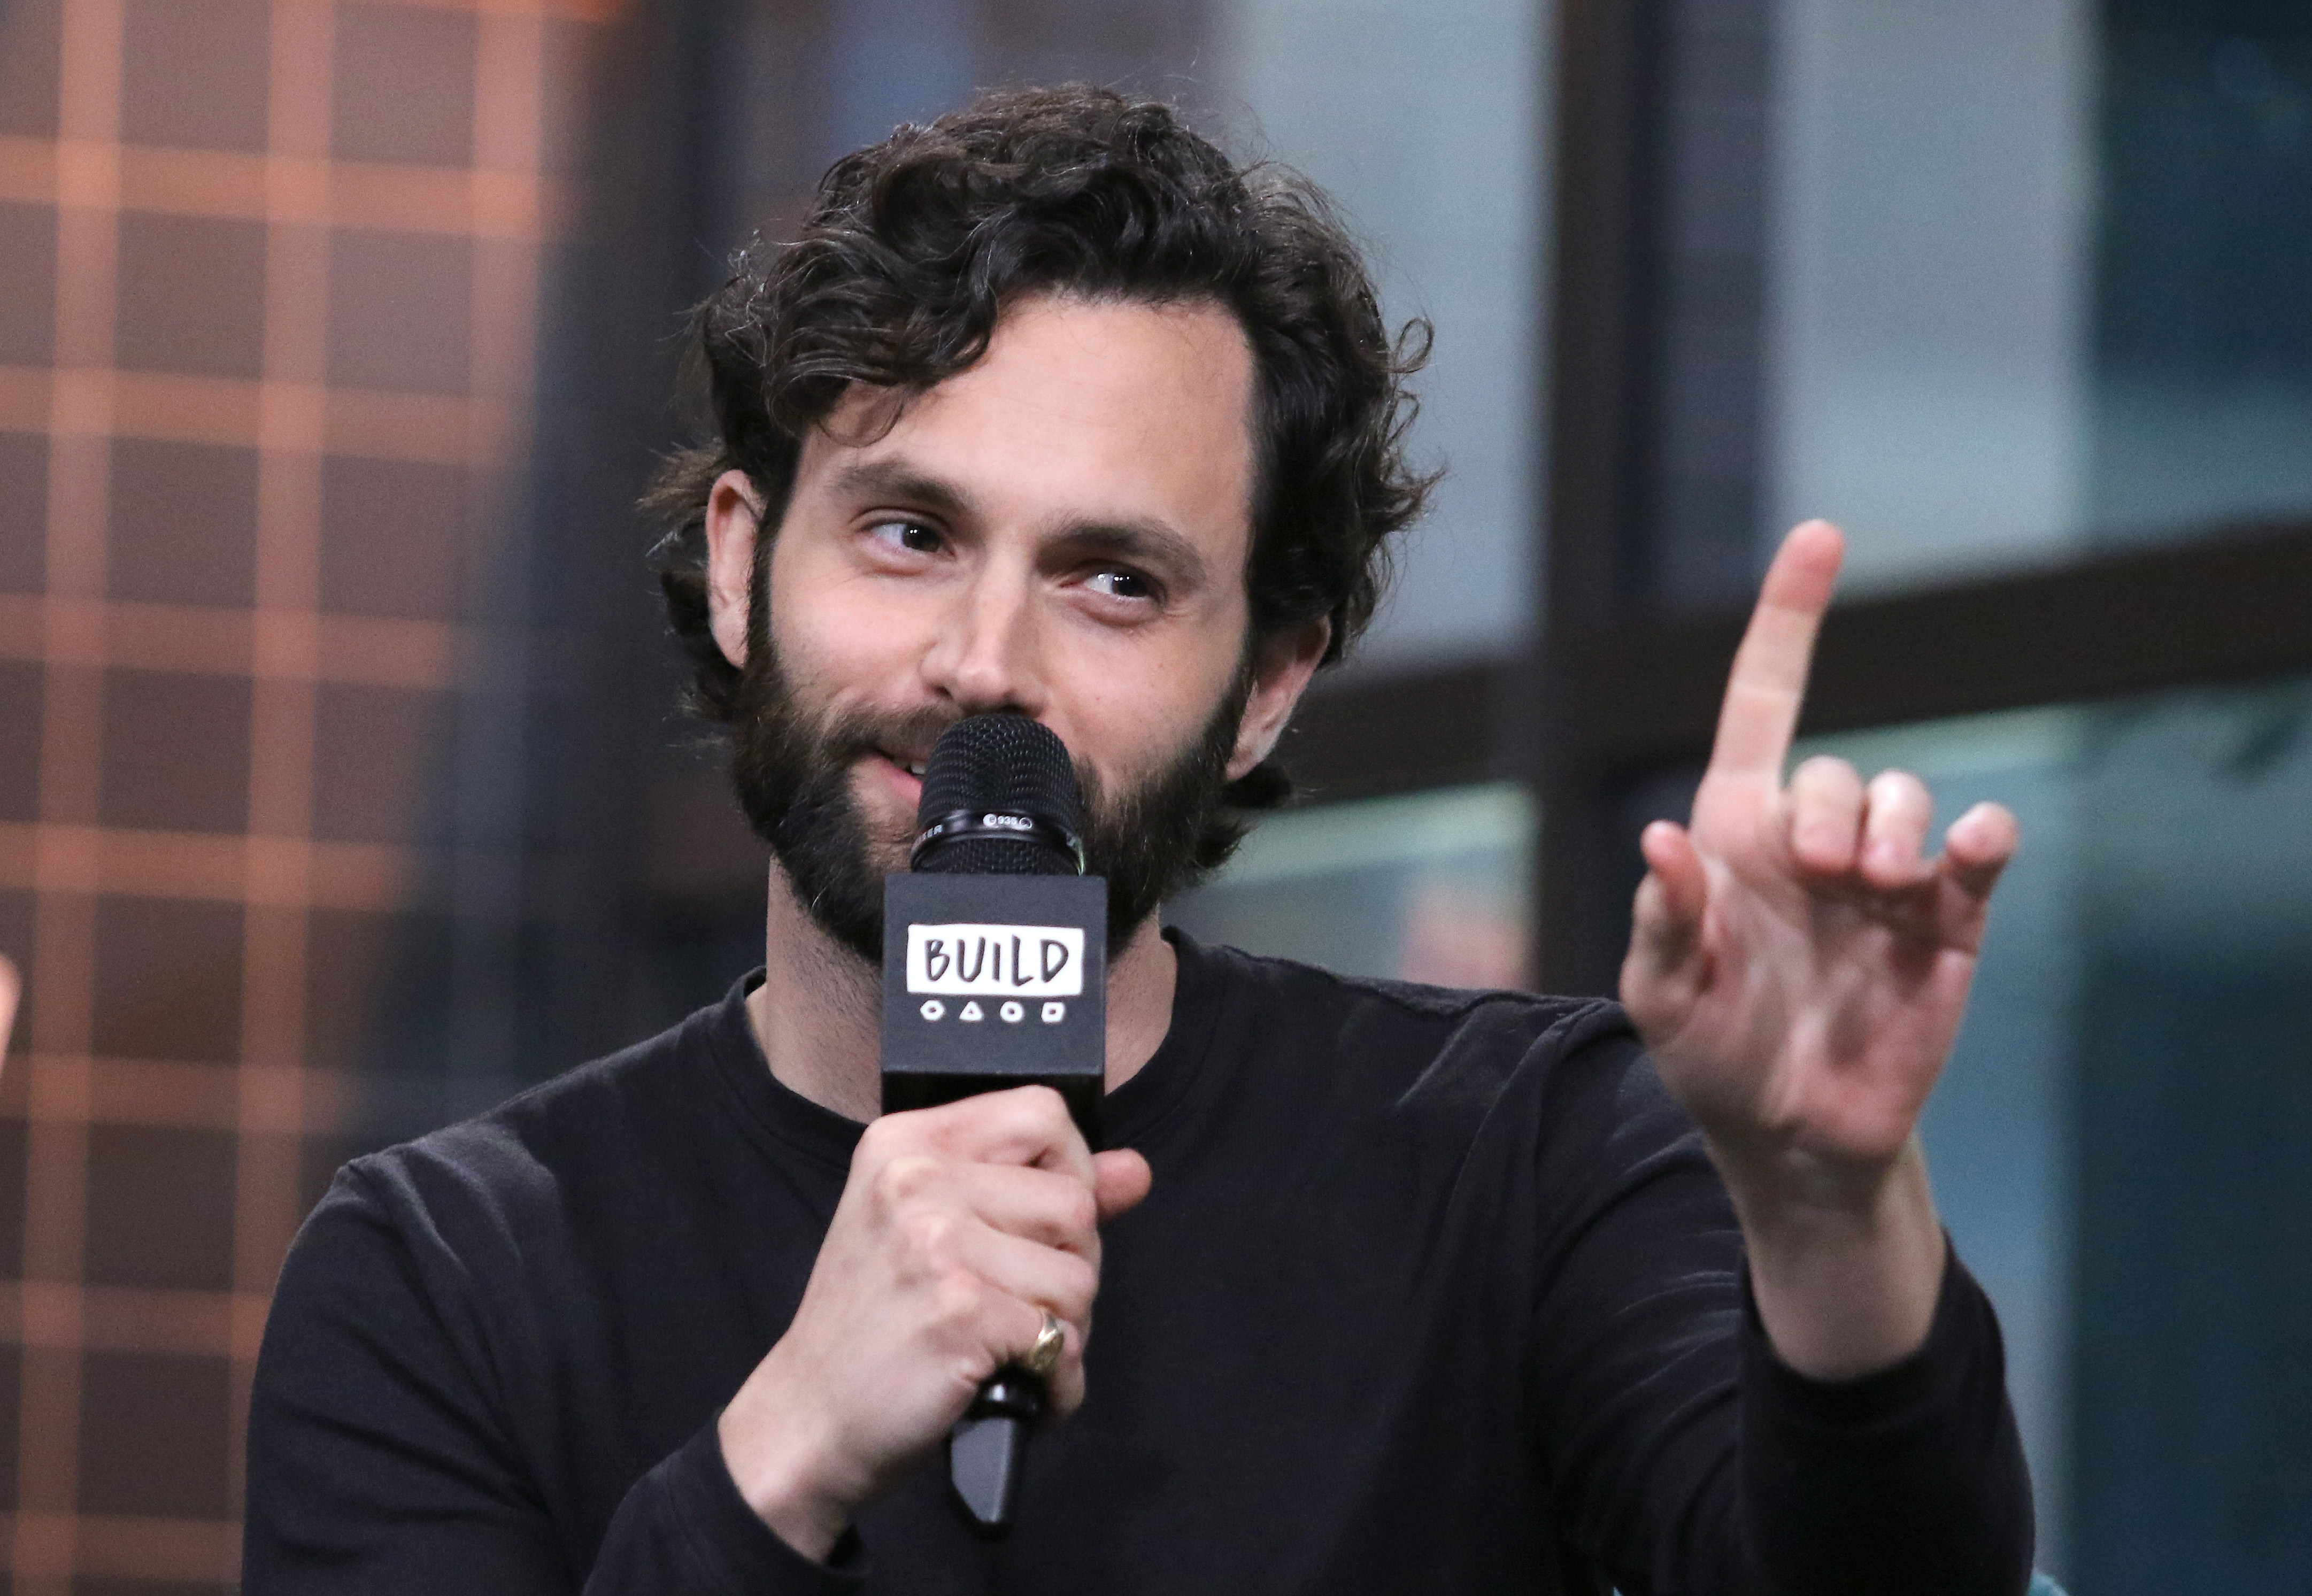 Penn Badgley attends the Build Series to discuss his show "You" at Build Studio on January 9, 2020, in New York City. | Source: Getty Images